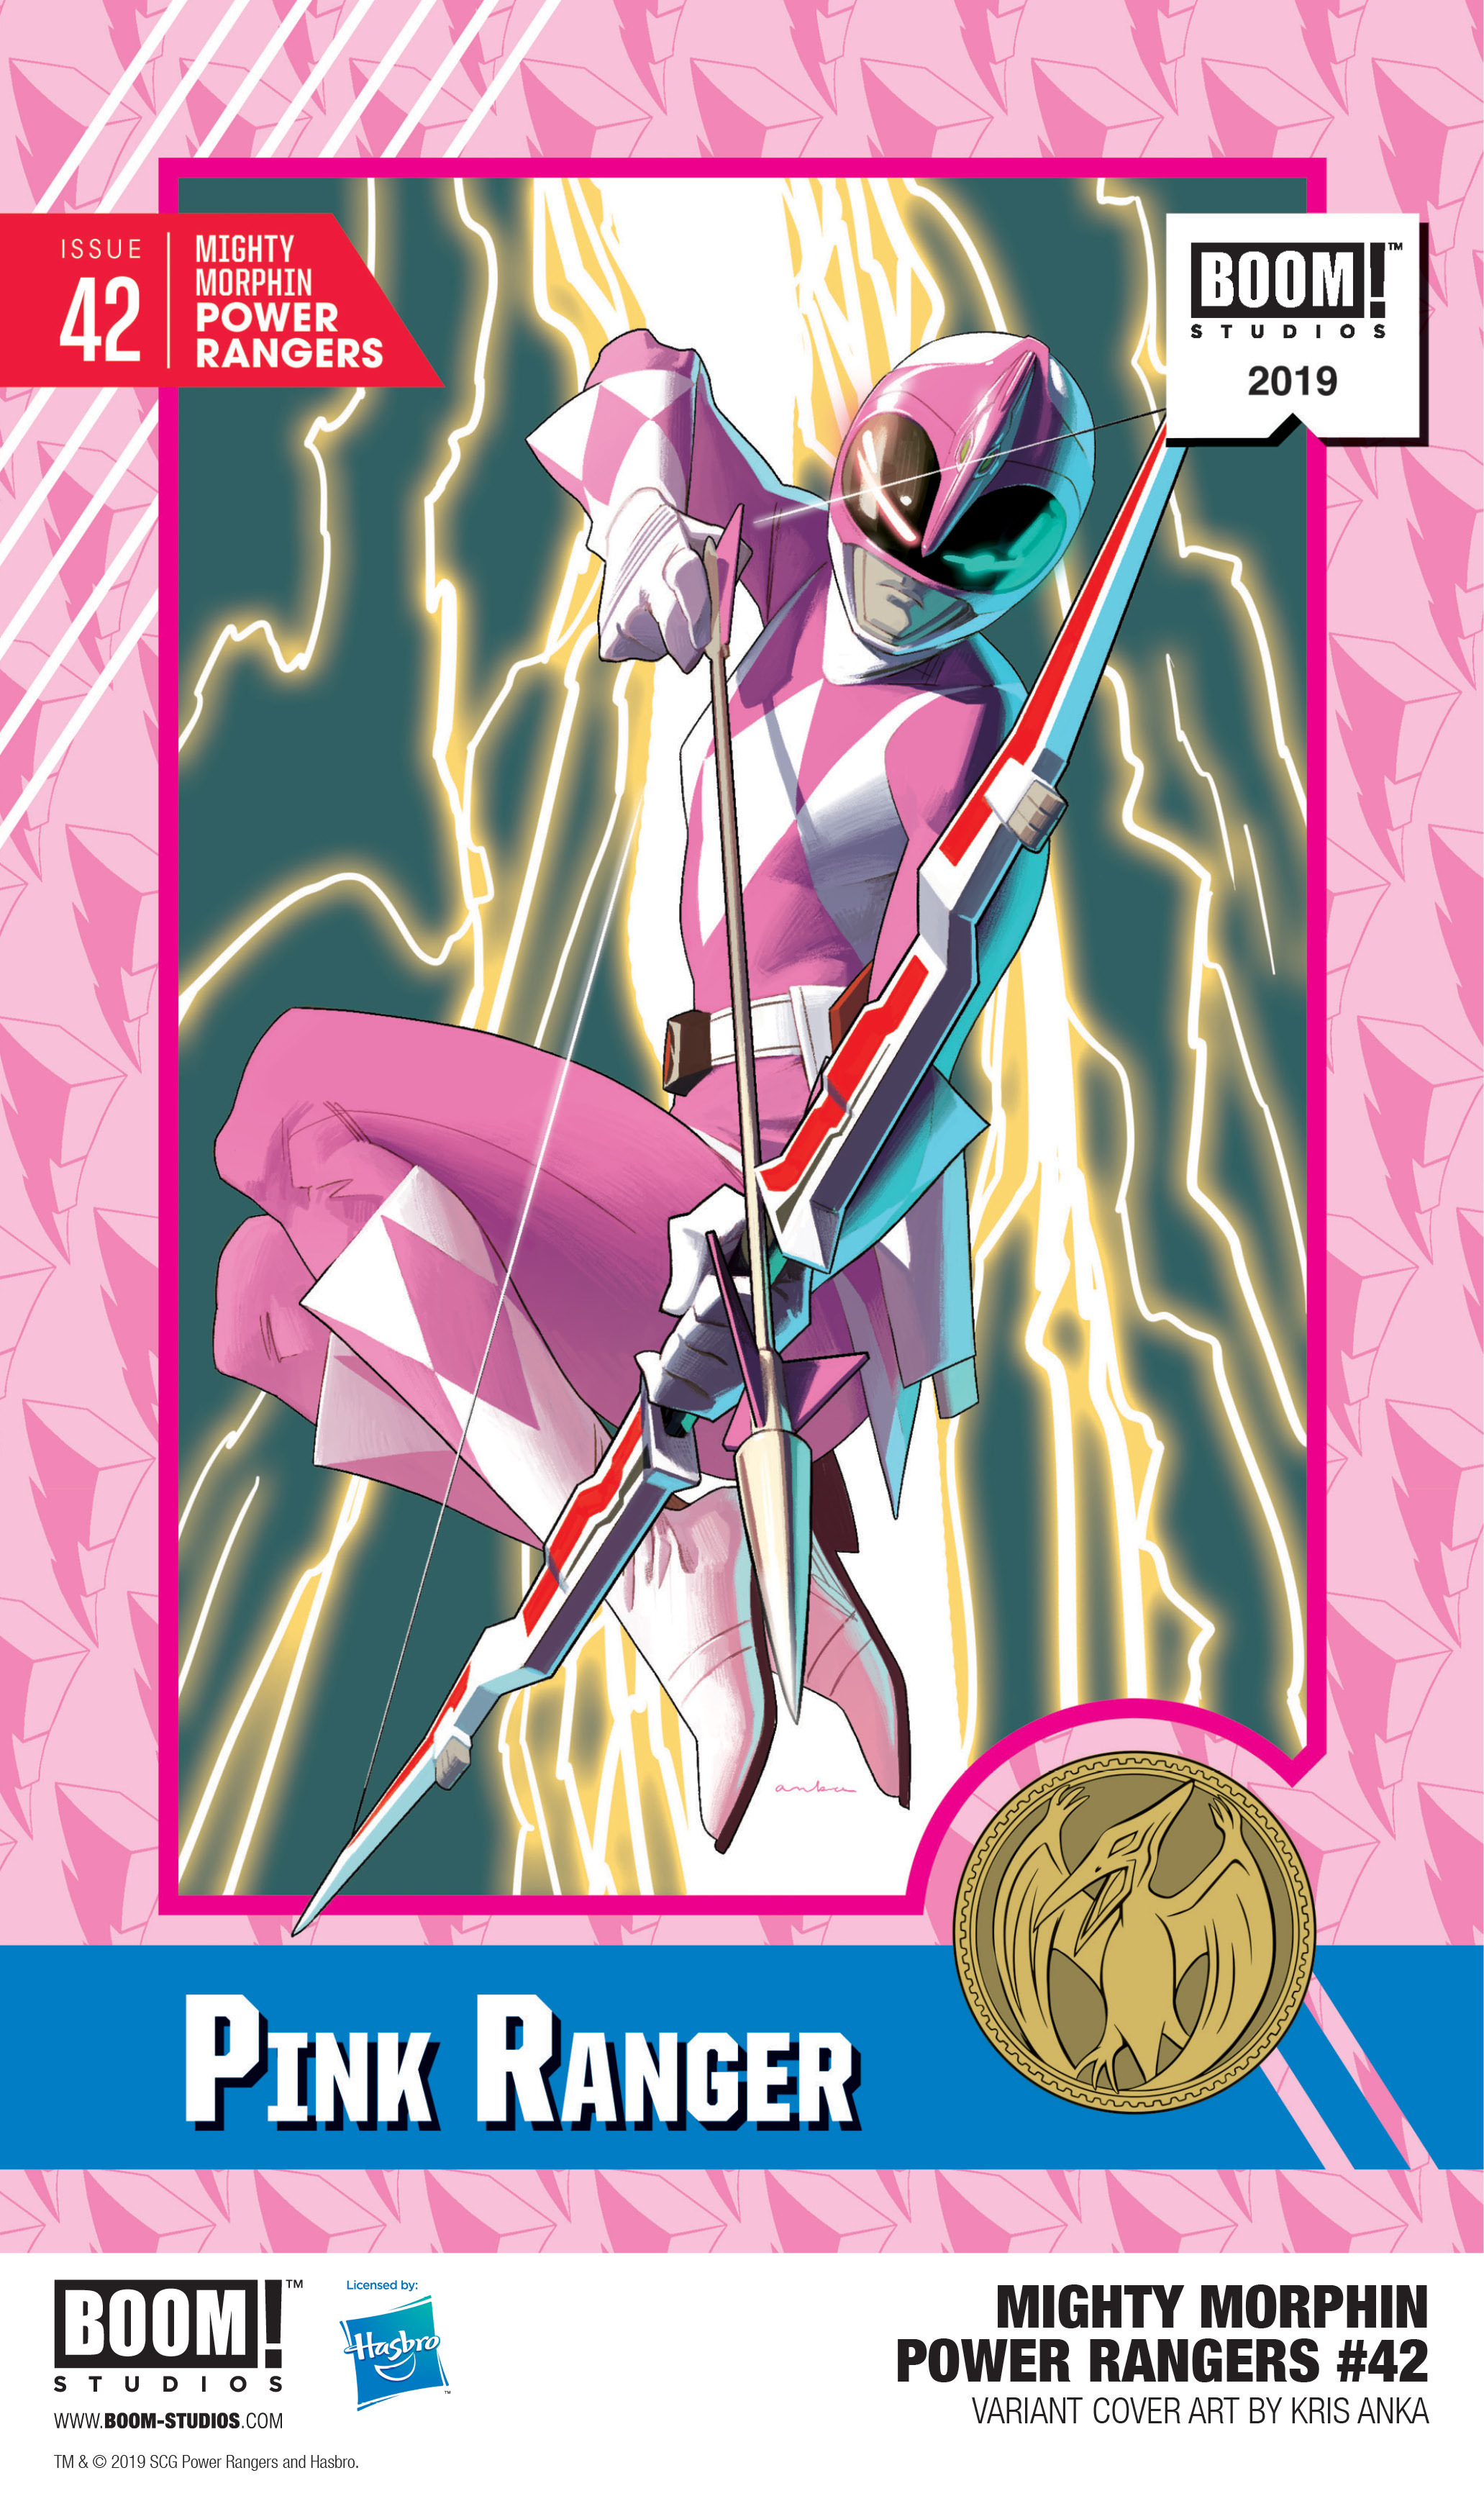 Mighty Morphin Power Rangers Trading Card variant